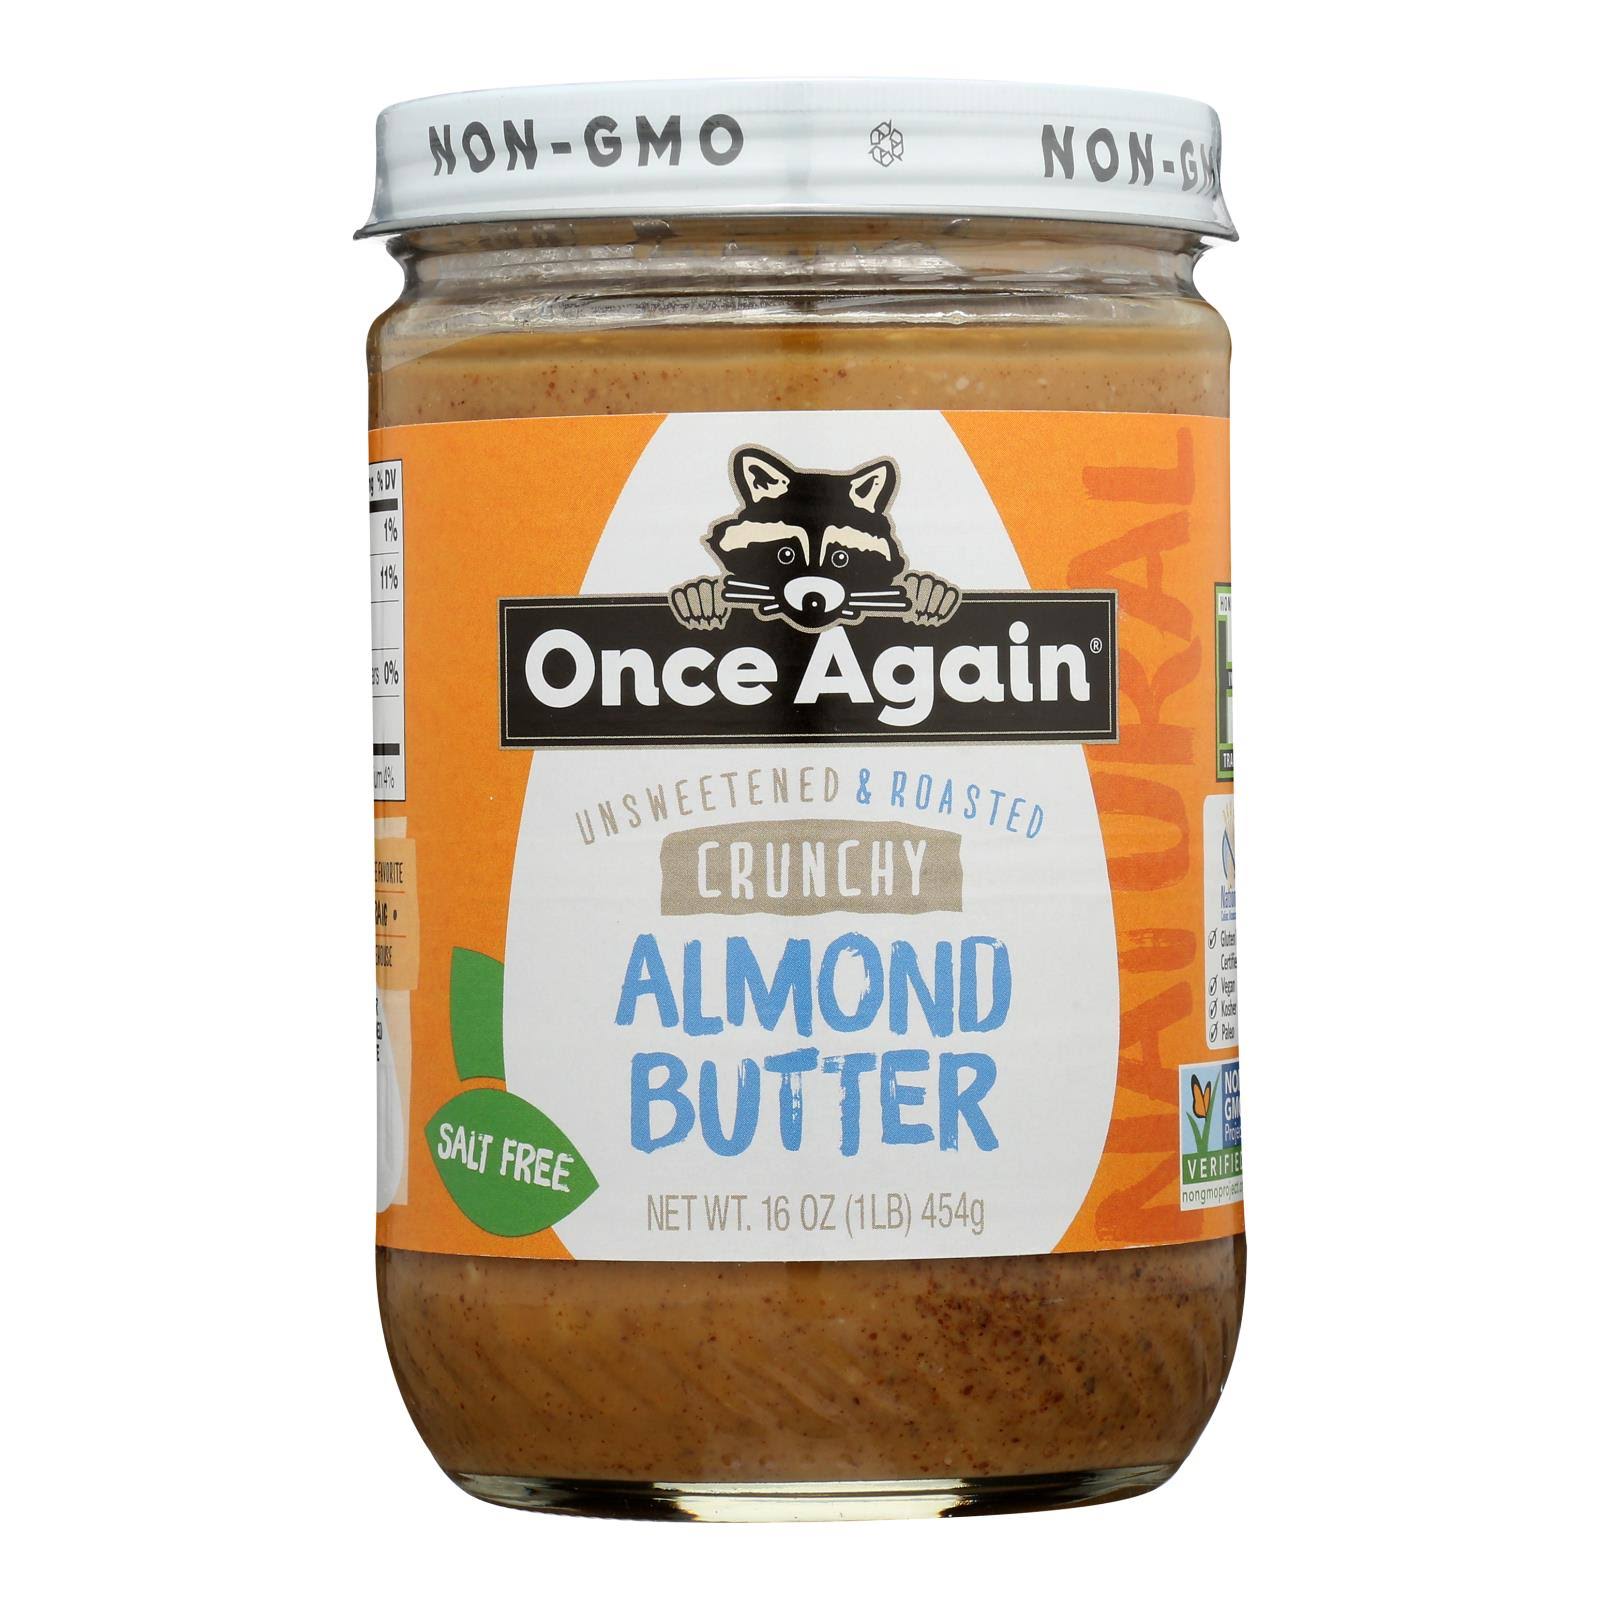 Once Again Natural Crunchy Almond Butter